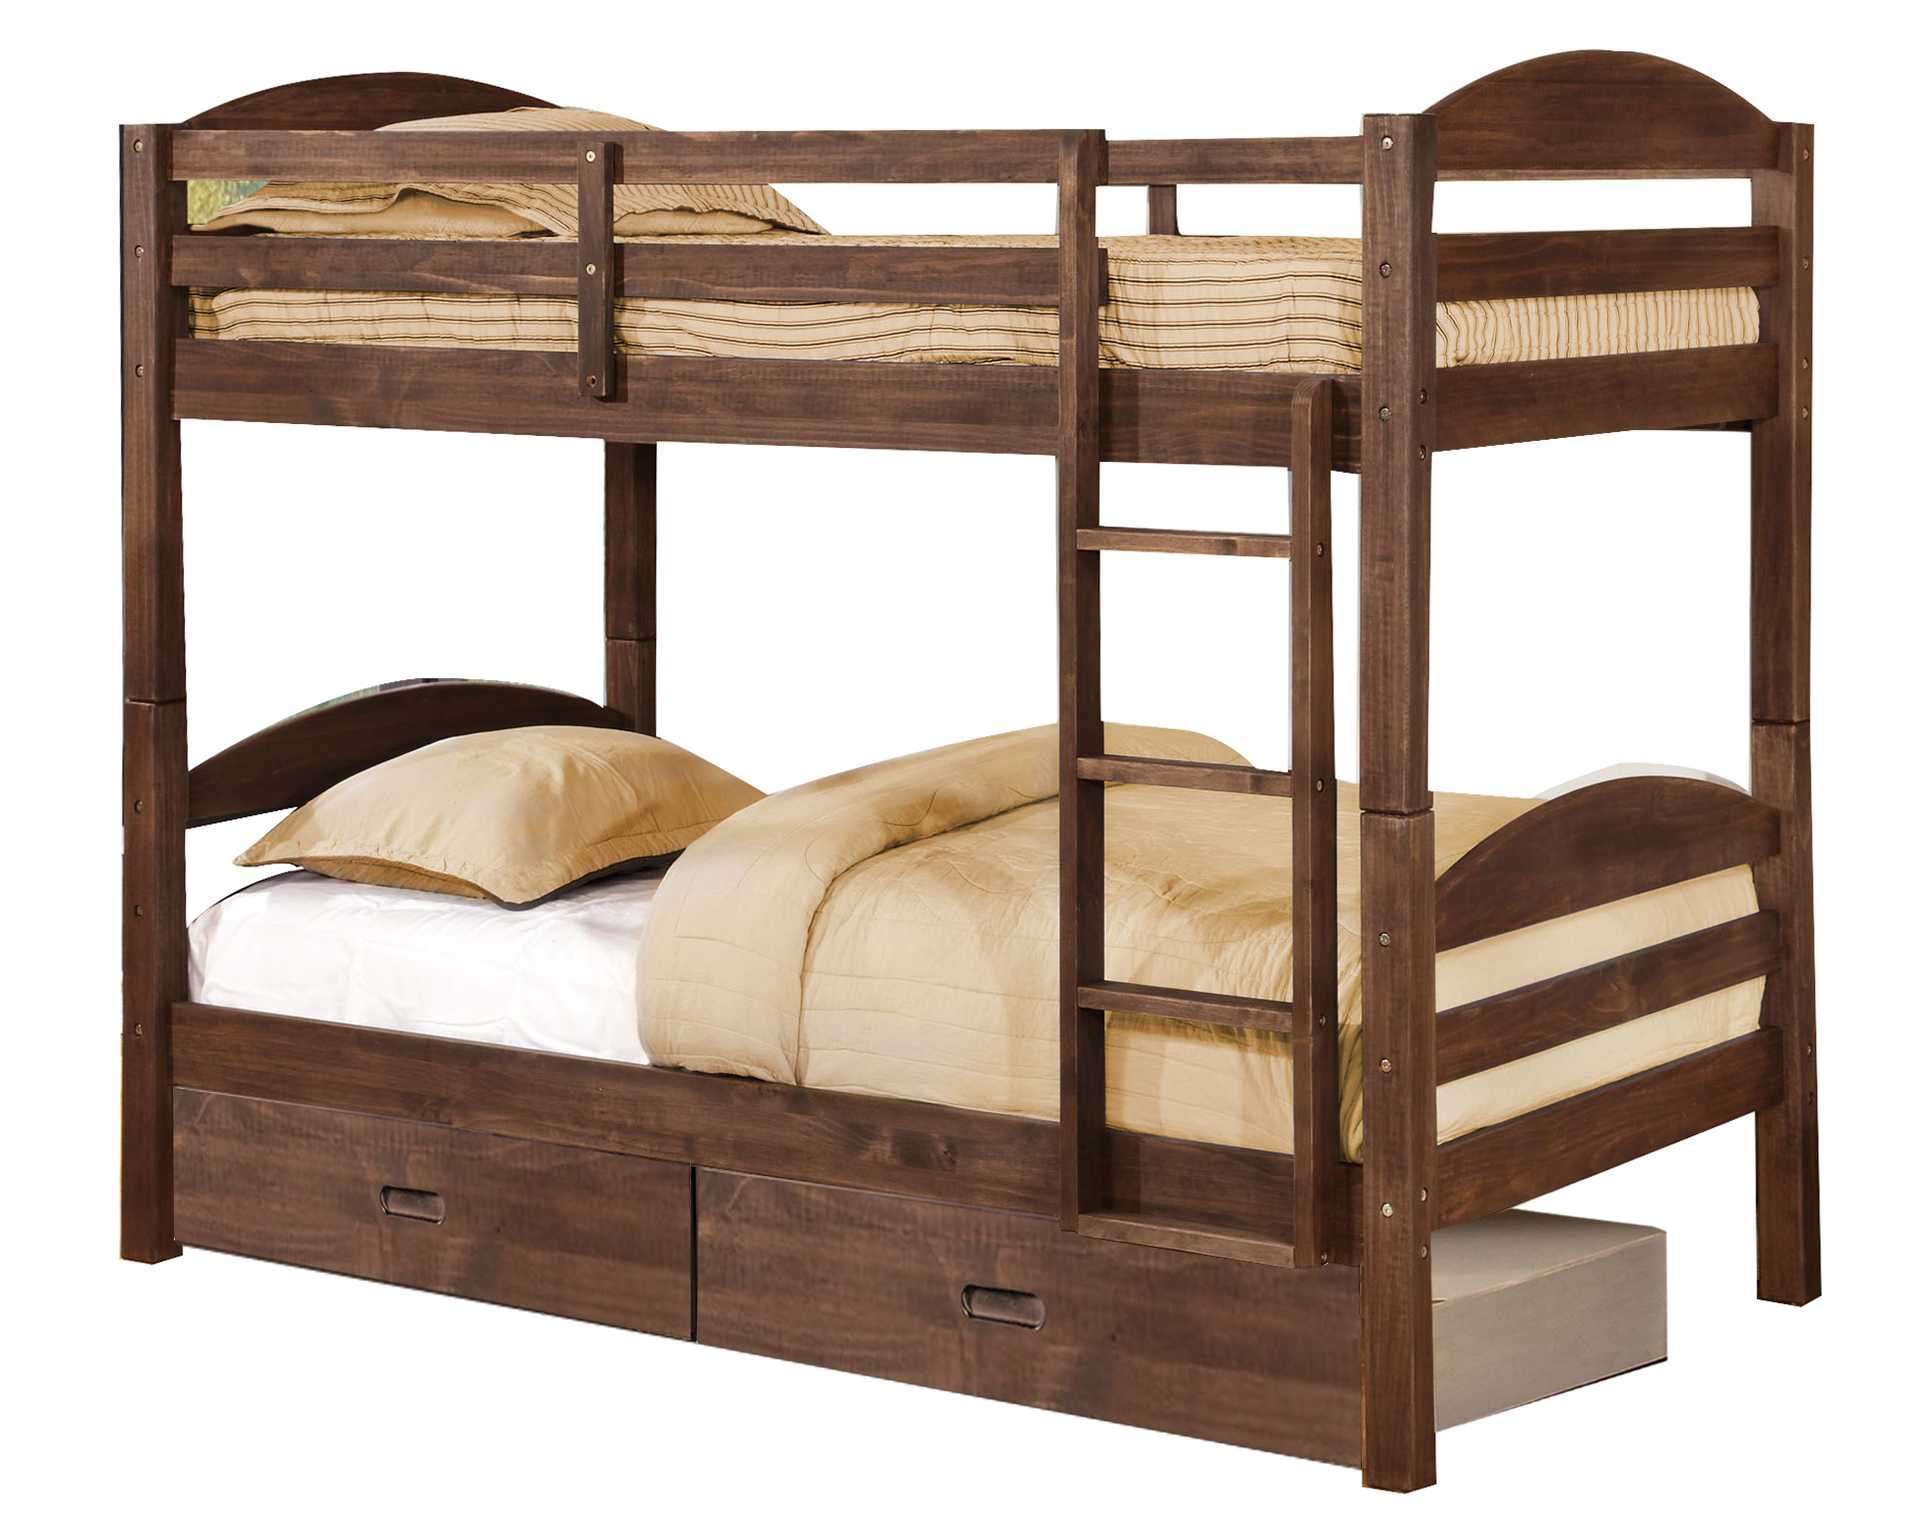 81" X 42.5" X 64.75" Brown Solid and Manufactured Wood Twin or Twin Bunk Bed with 2 Drawers